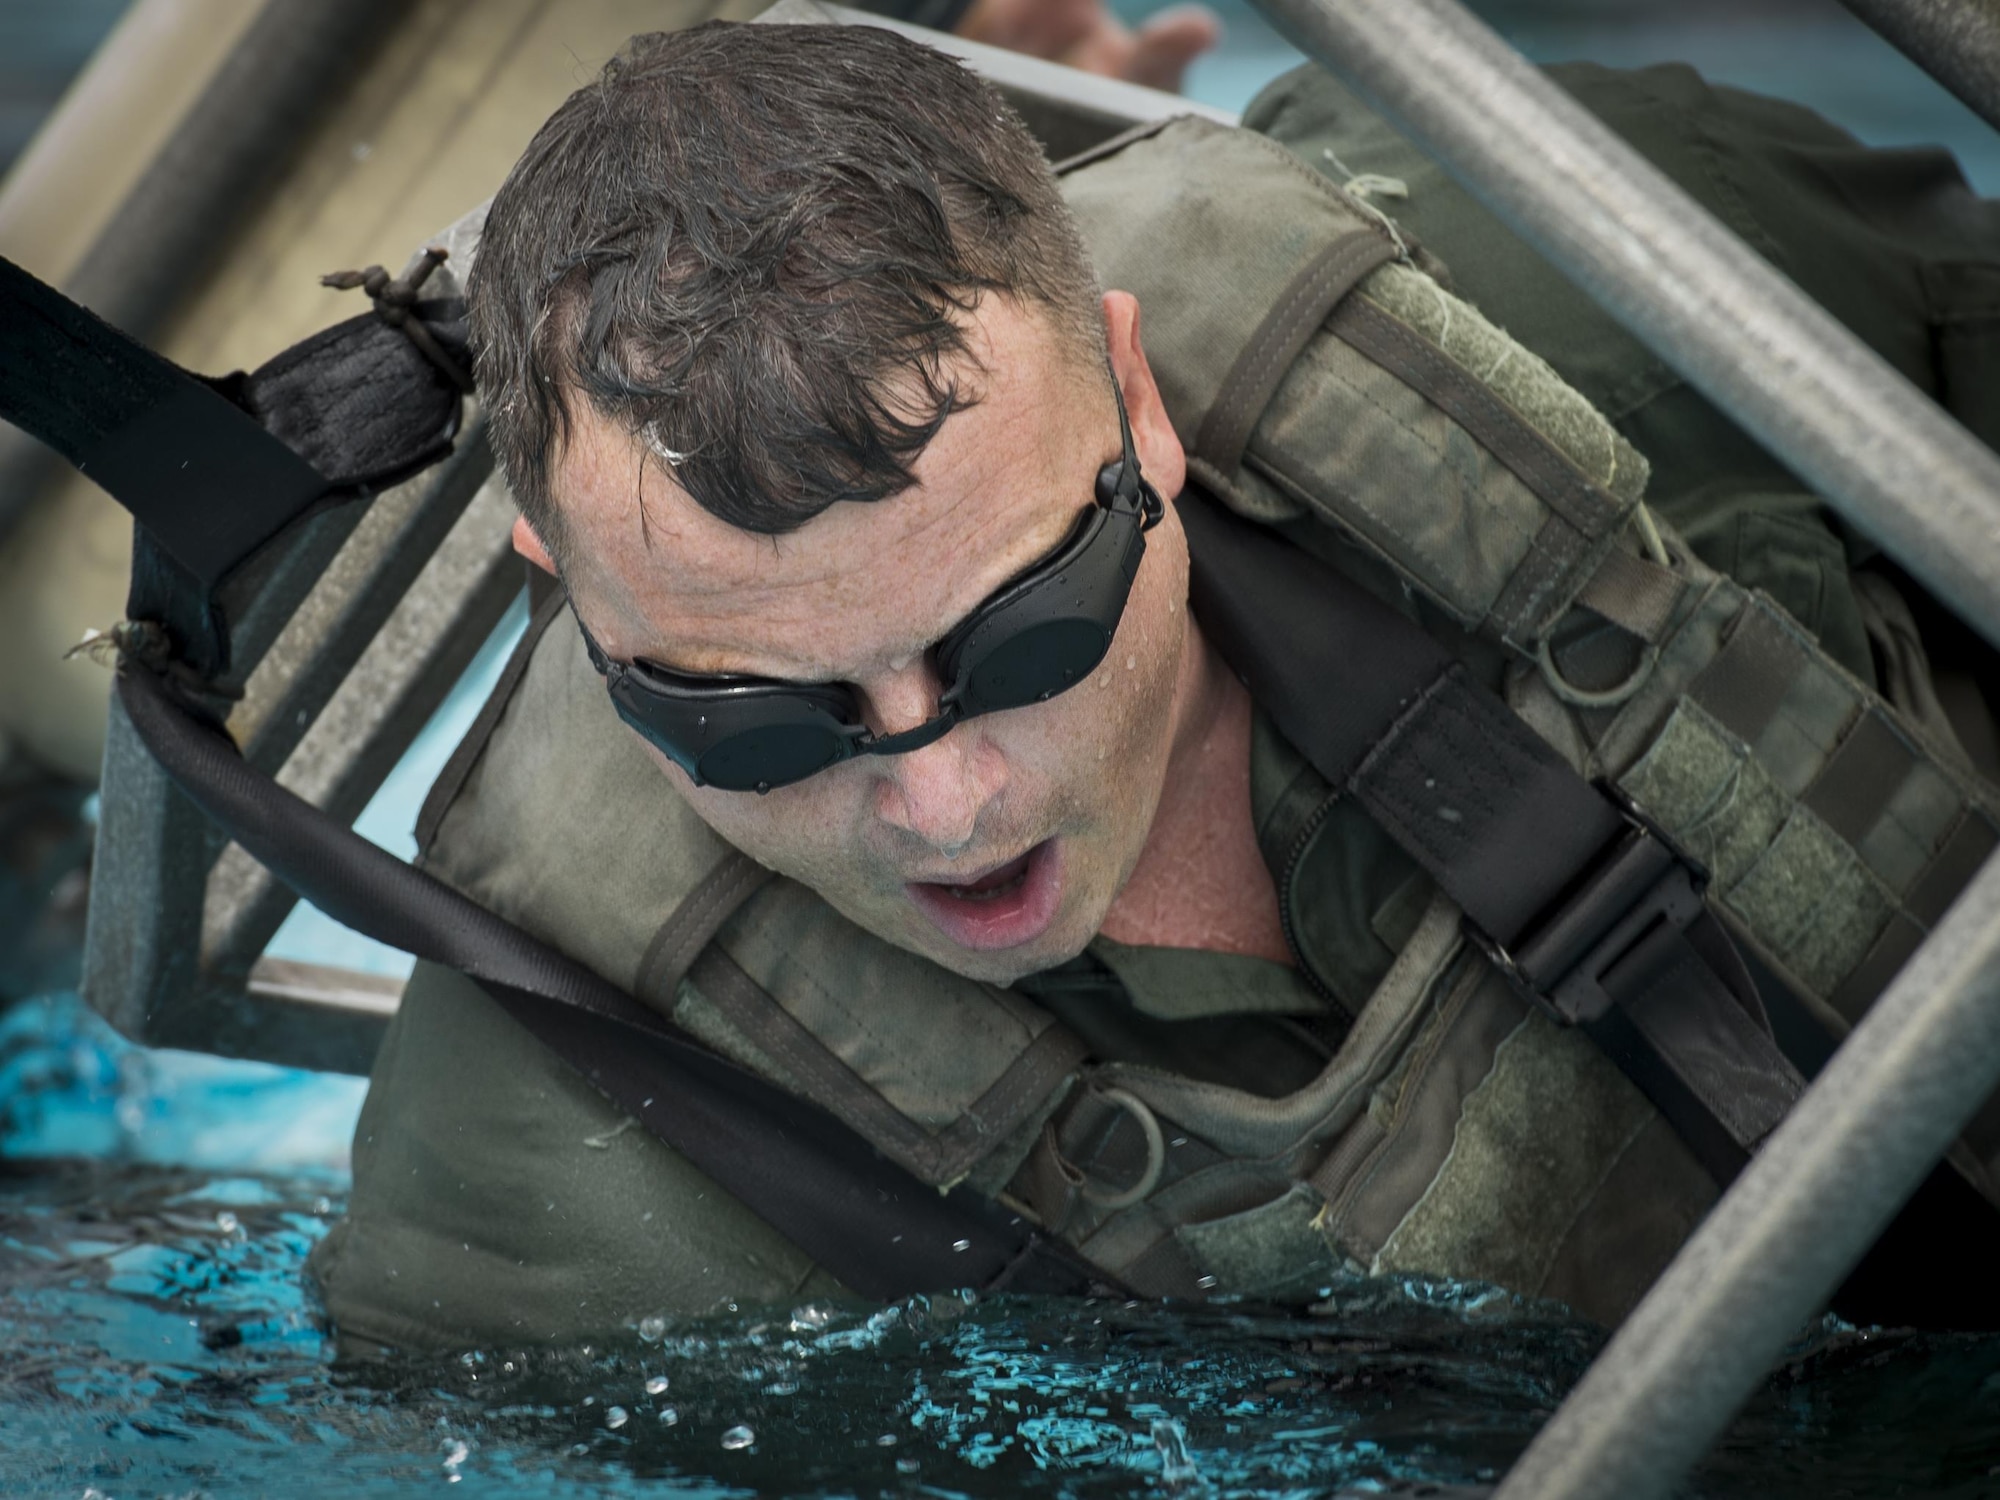 Maj. Richard Fogel, a flight safety officer with Air Force Special Operations Command, prepares to be submerged during rotary wing water survival training at Hurlburt Field, Fla., July 18, 2017. Survival, evasion, resistance and escape specialists with the 1st Special Operations Support Squadron led rotary wing water survival training to ensure aircrew are proficient on emergency procedure skill sets if ever faced with a real-world incident. (U.S. Air Force photo by Airman 1st Class Joseph Pick)